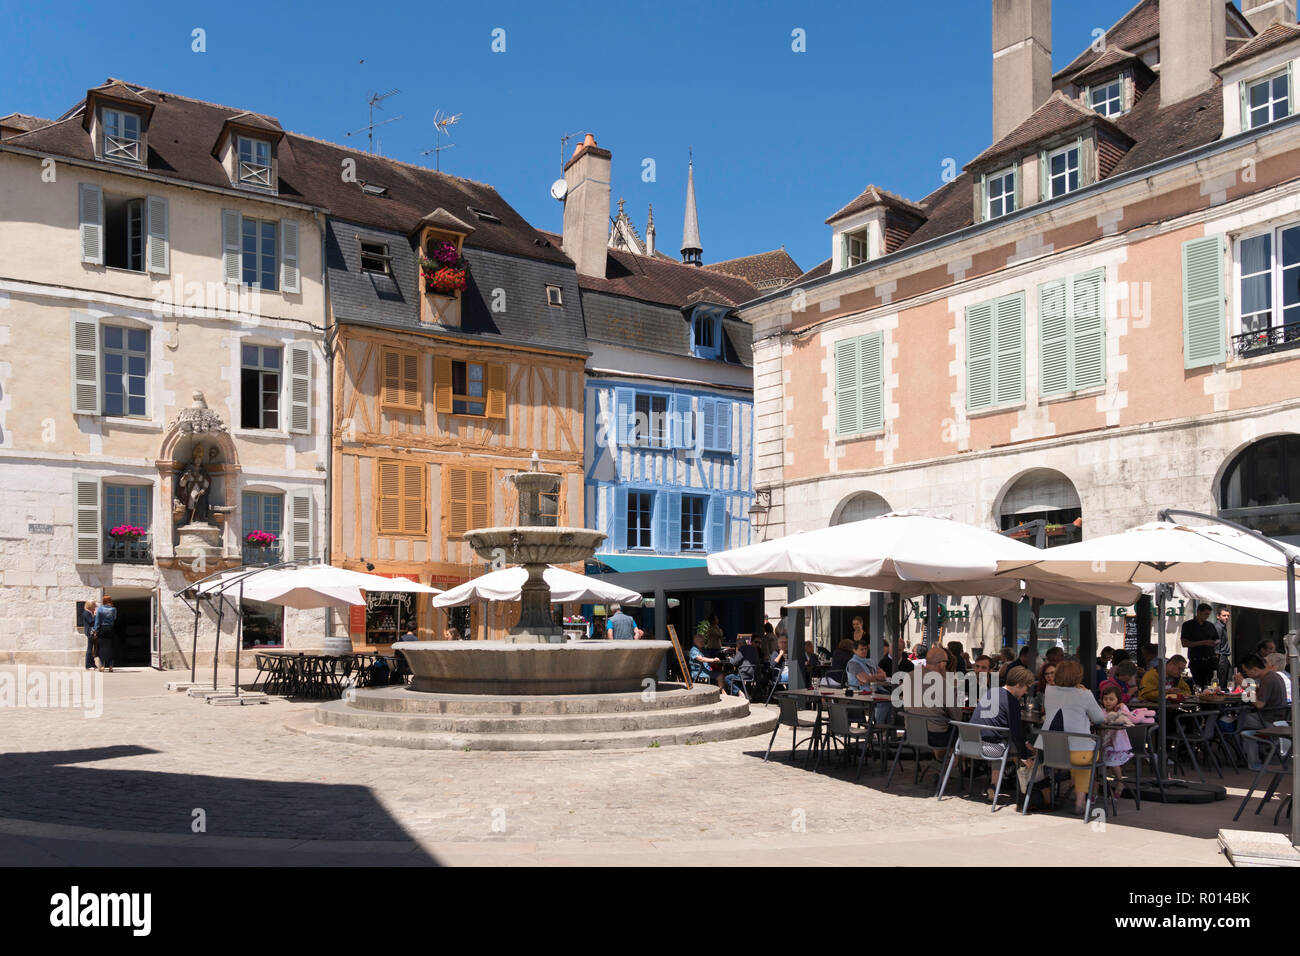 People eating outside at a restaurant in La Place Saint Nicolas, Auxerre, Burgundy, France, Europe Stock Photo